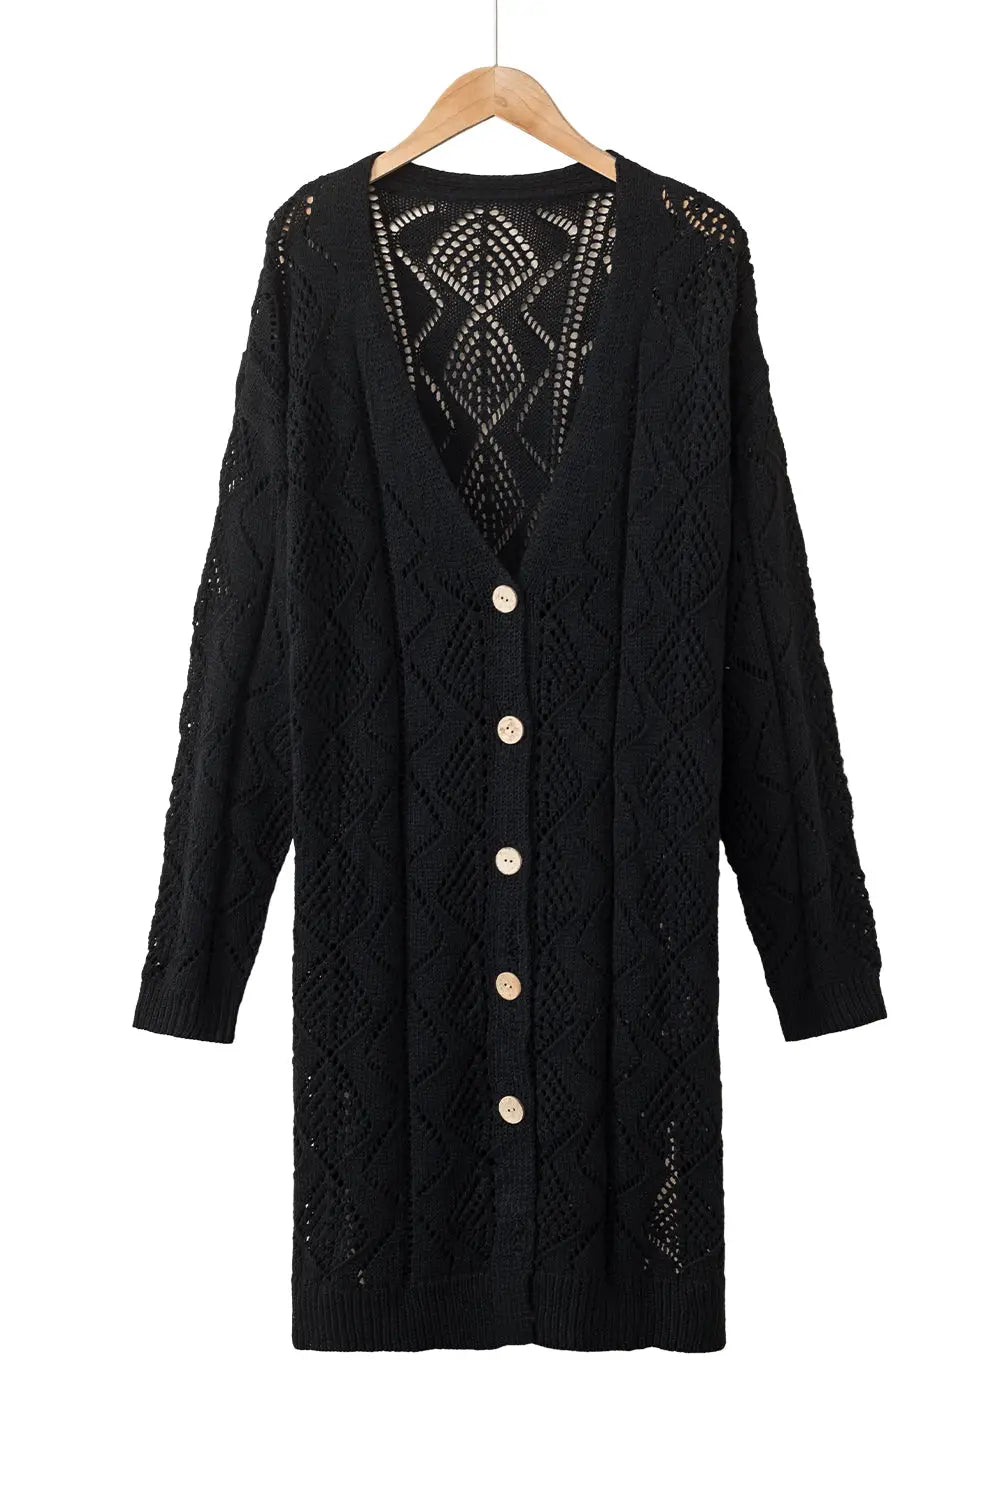 Khaki hollow-out openwork knit cardigan - sweaters & cardigans